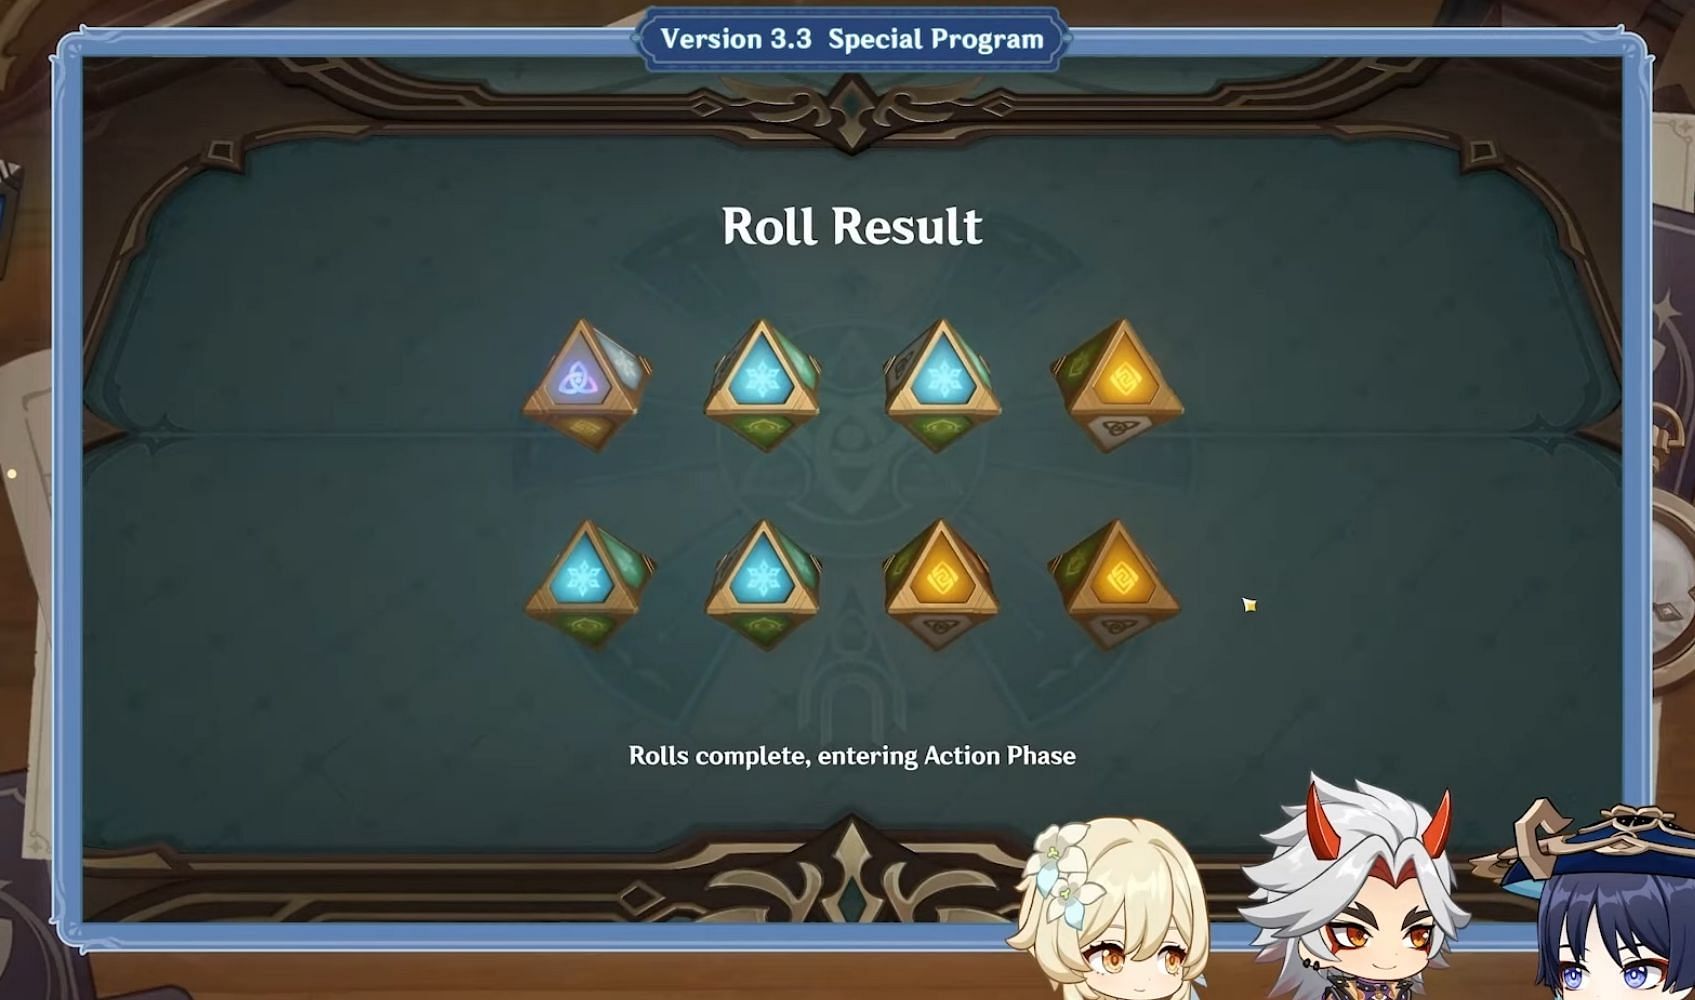 You also have to roll dice in order to obtain elements for your characters (Image via HoYoverse)